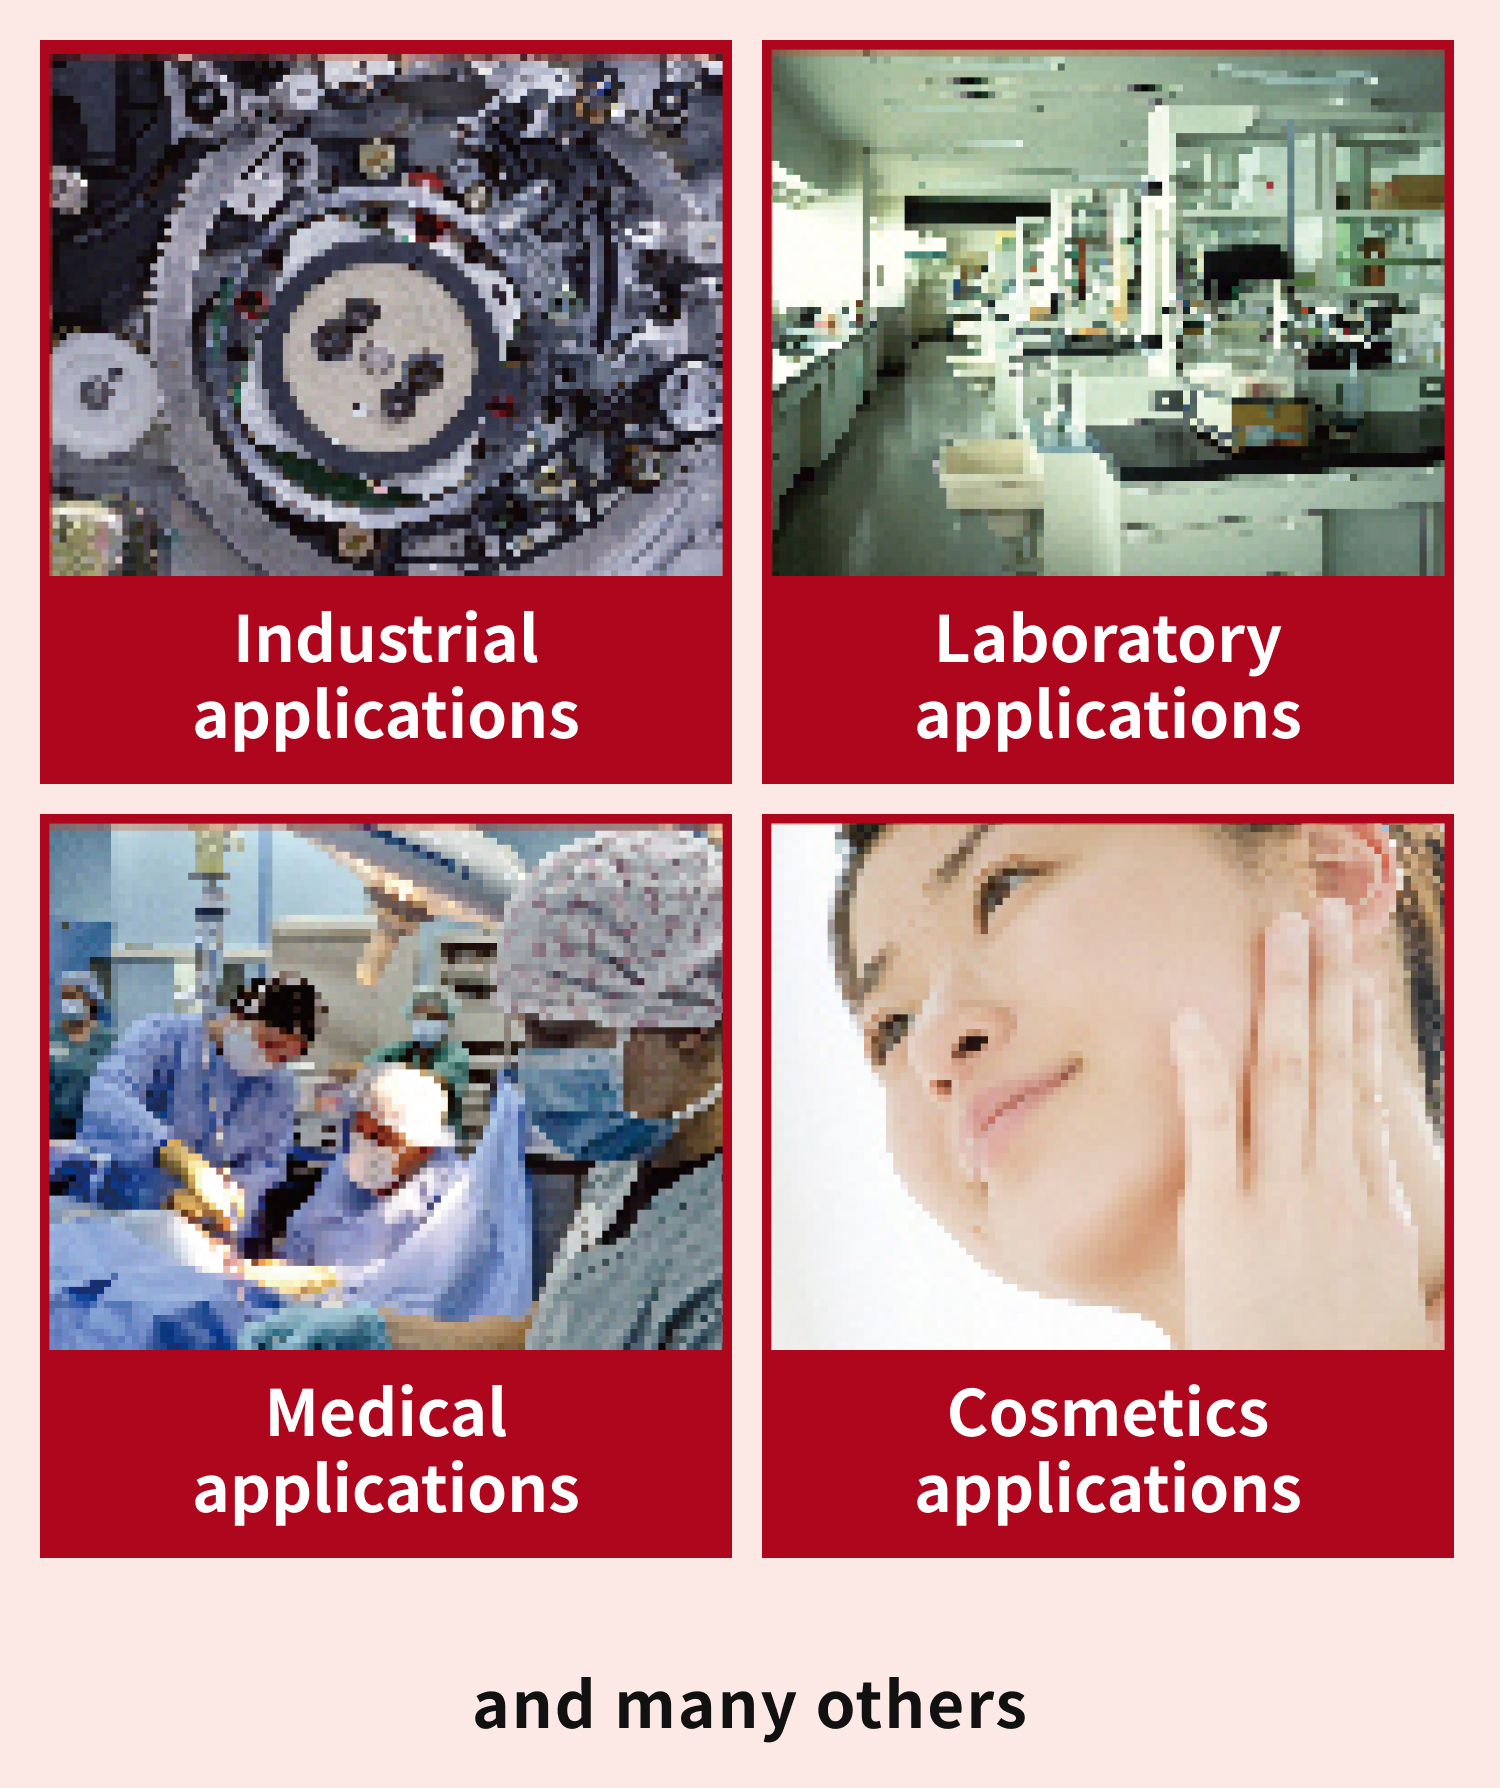 Apply to various purposes such as industrial, laboratoly, medical, cosmetics.